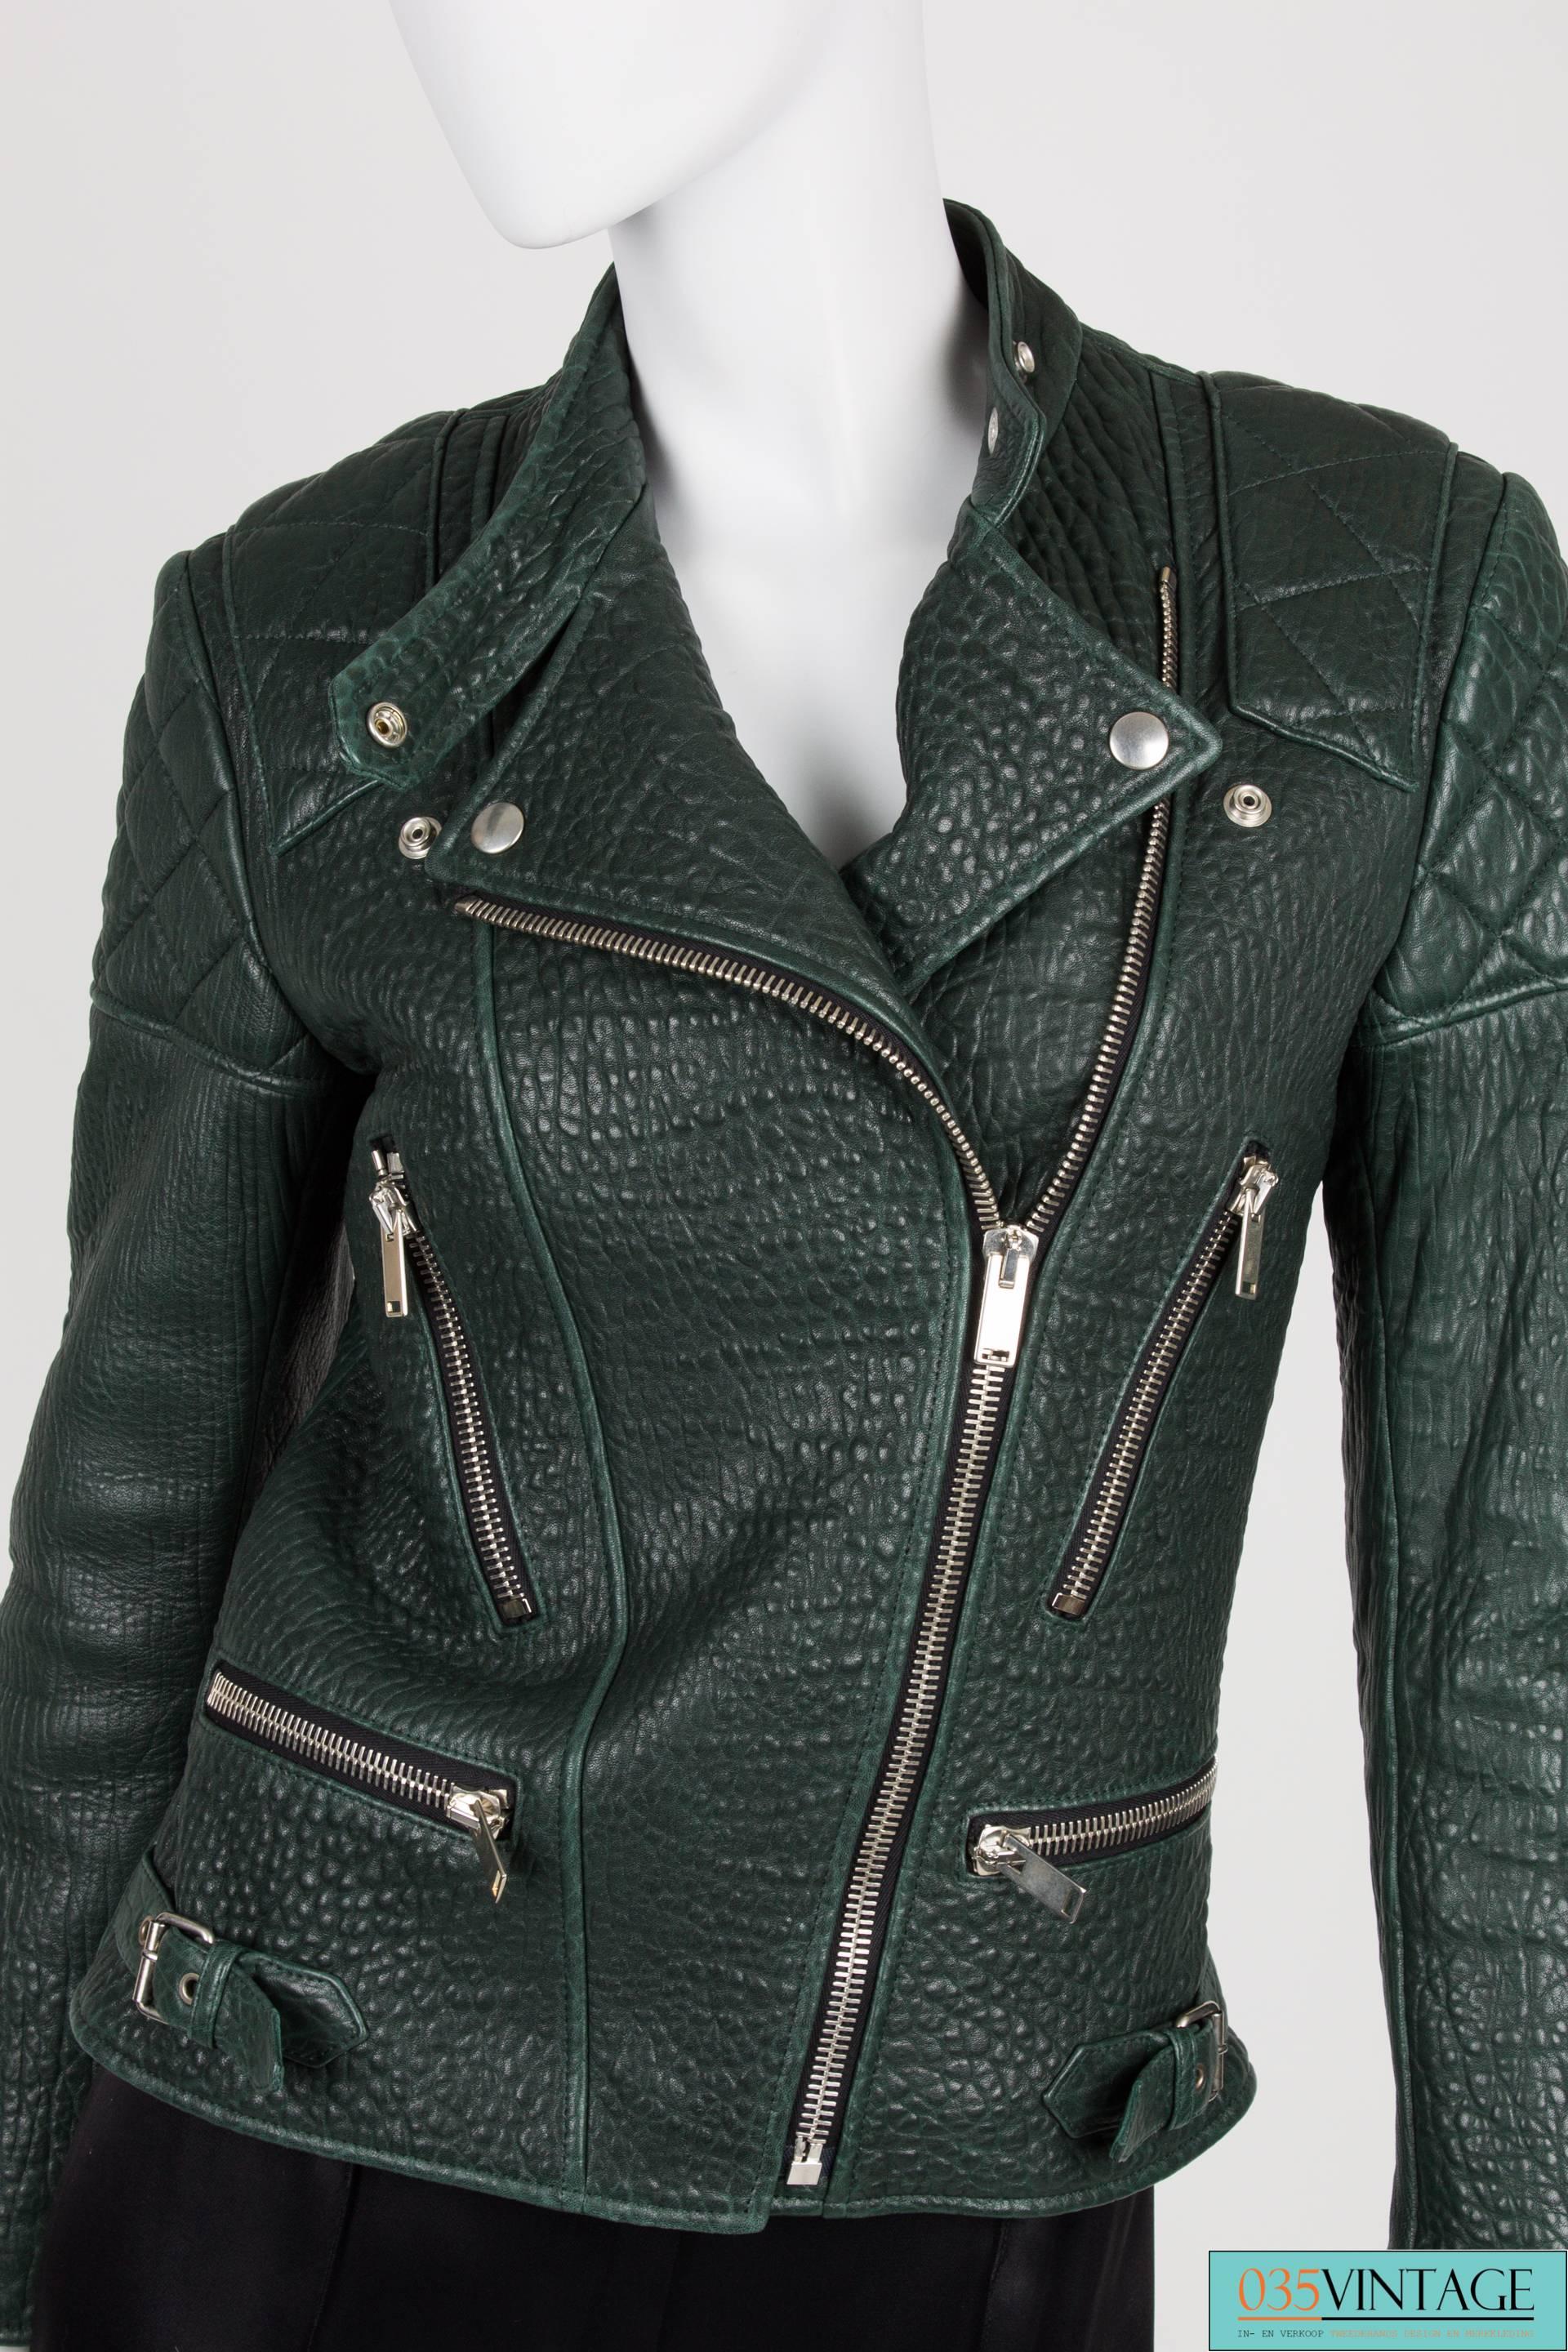 Very rare deep forest green shrunken kangaroo leather biker jacket designed by Phoebe Philo for CelineOn the shoulders, top of the back and elbows quilted pieces of leather for that extra tough look. Covered with silver zippers everywhere, also at